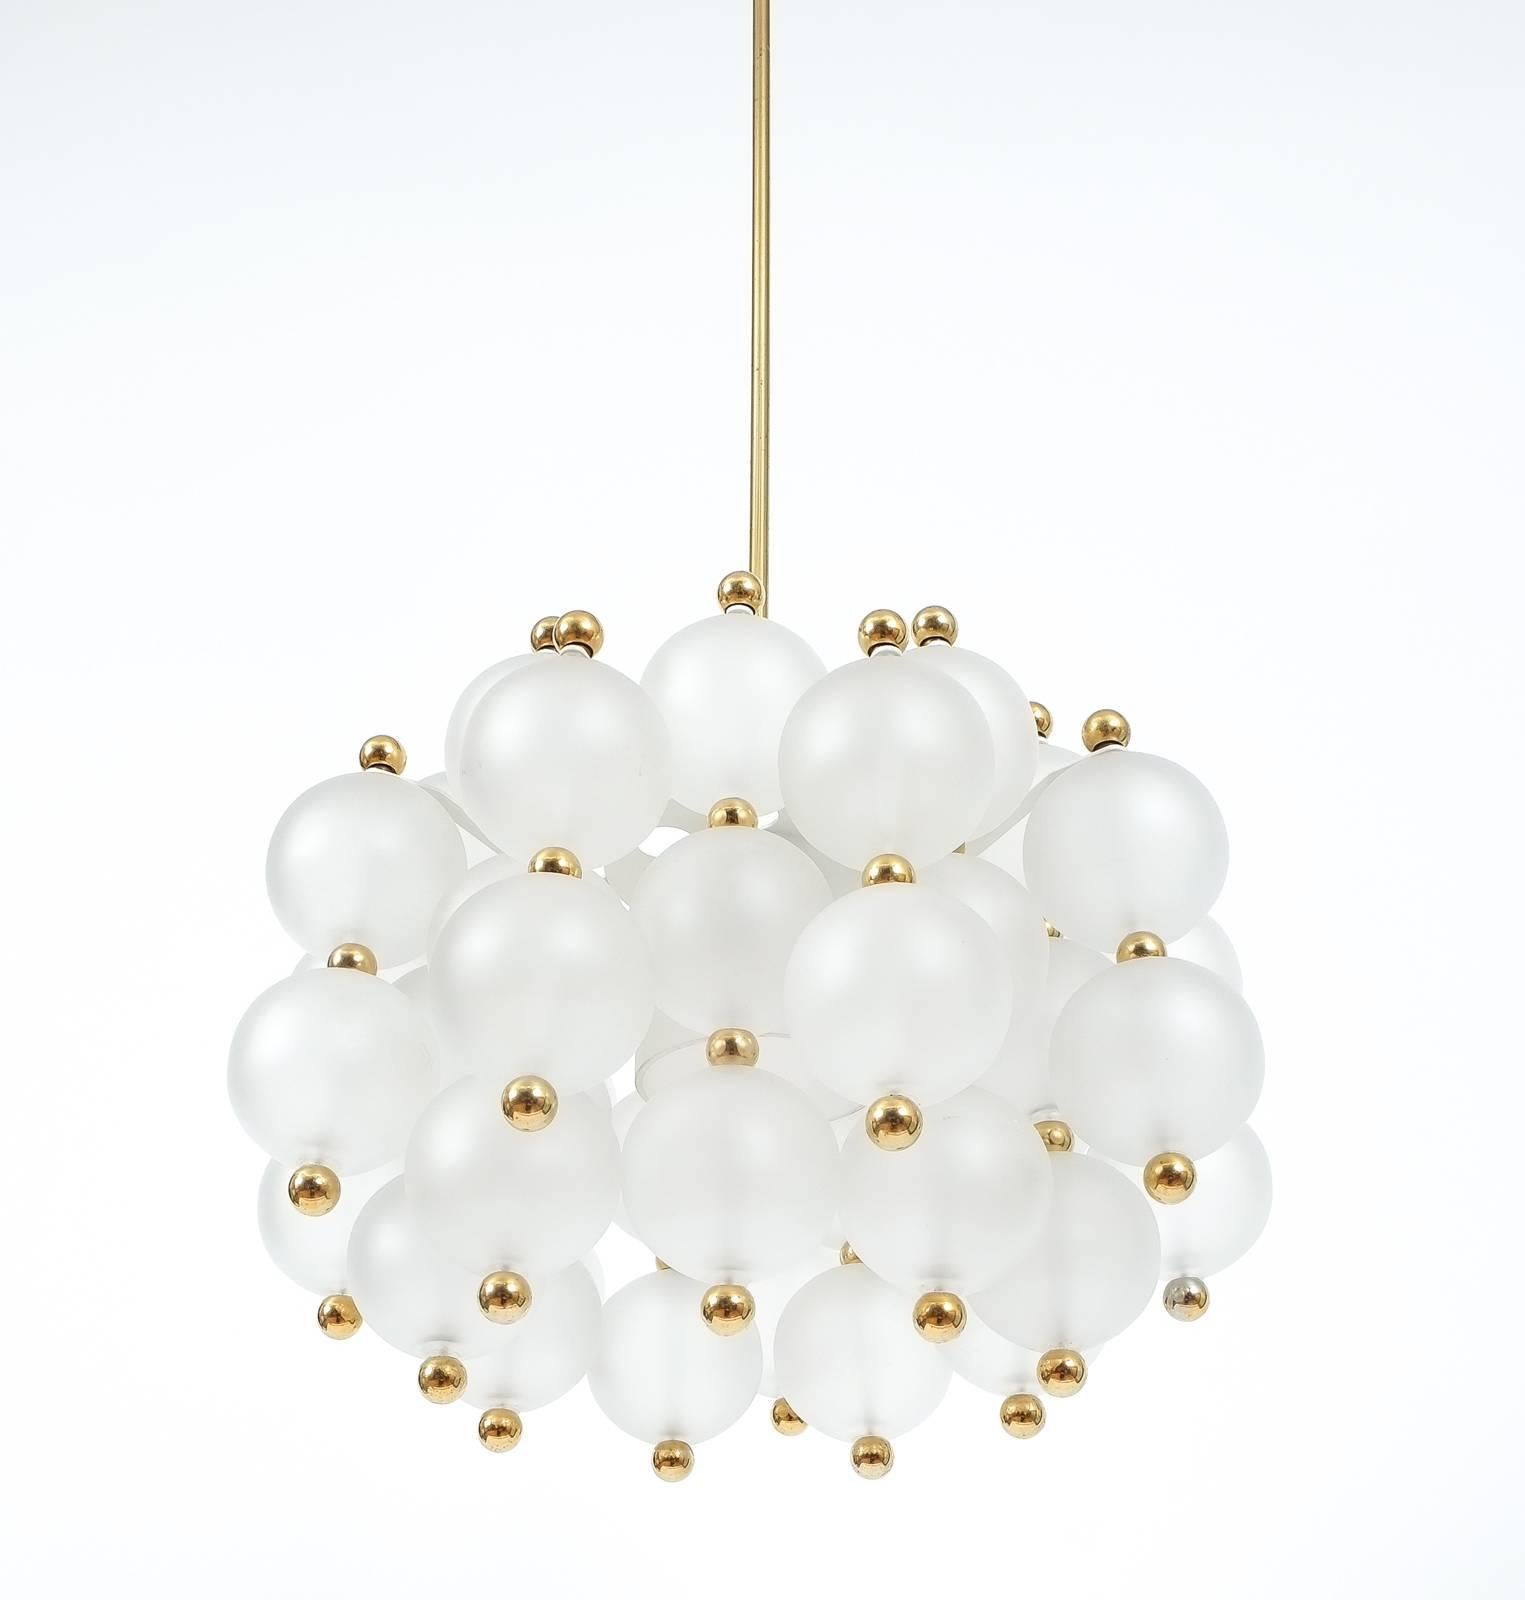 Mid-Century Modern Satin Glass Chandelier Lamp By Kinkeldey With Gold Knobs, circa 1980 For Sale